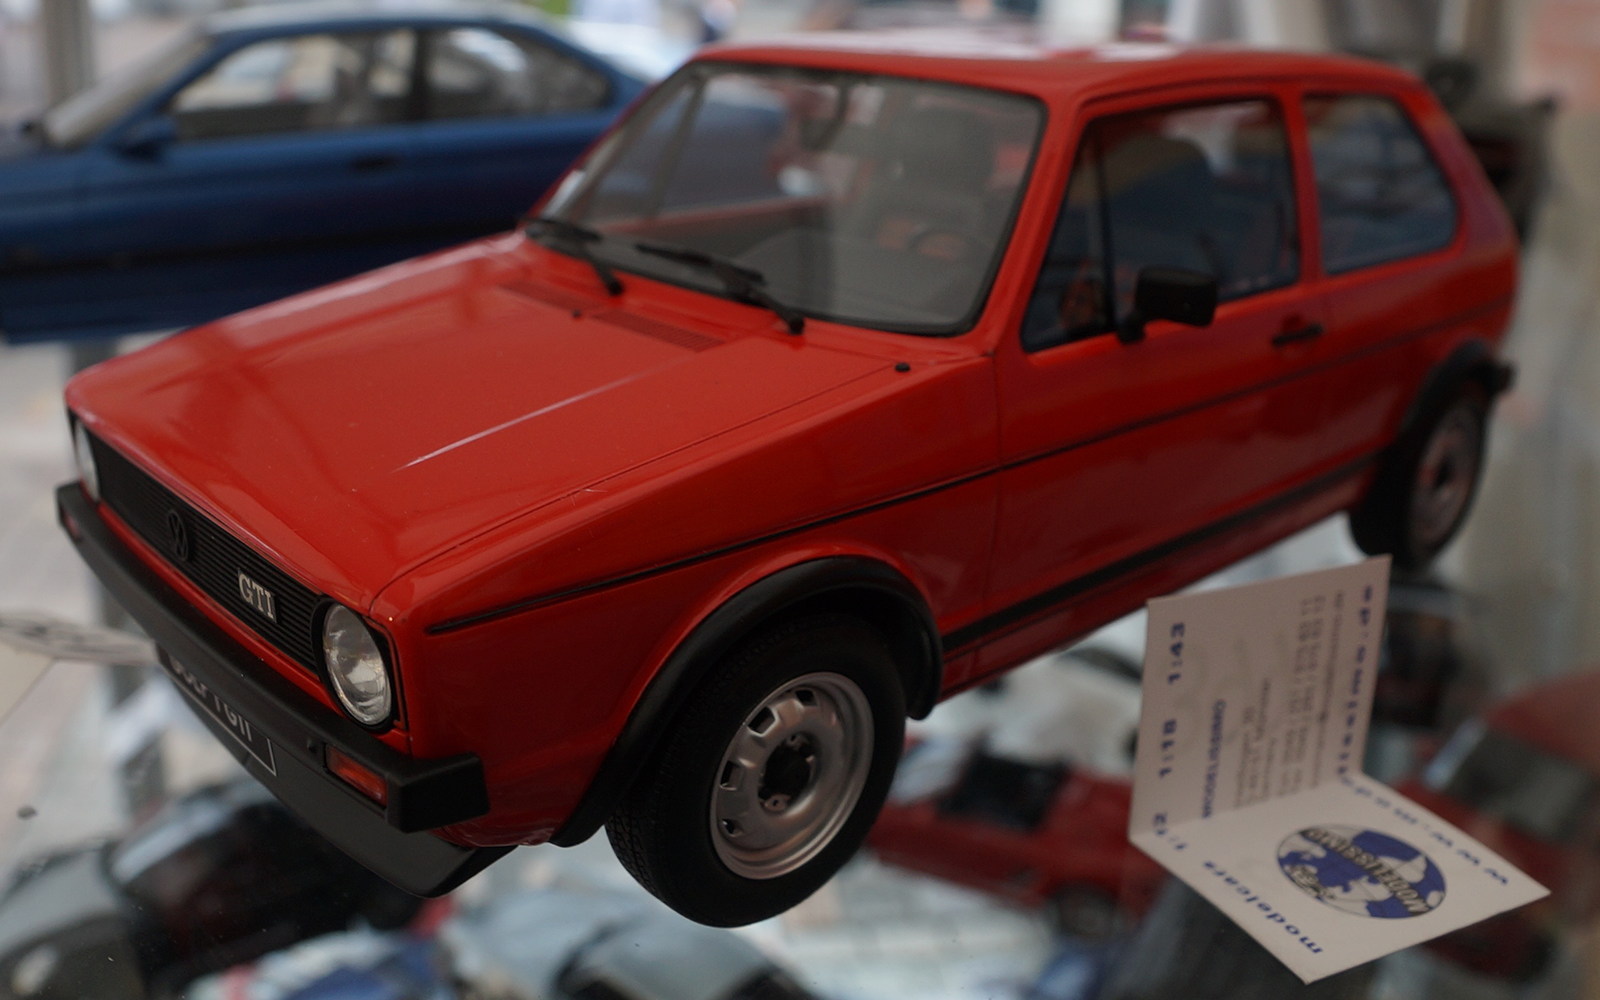 1:12 Scale Volkswagen Golf GTI by Otto Mobile